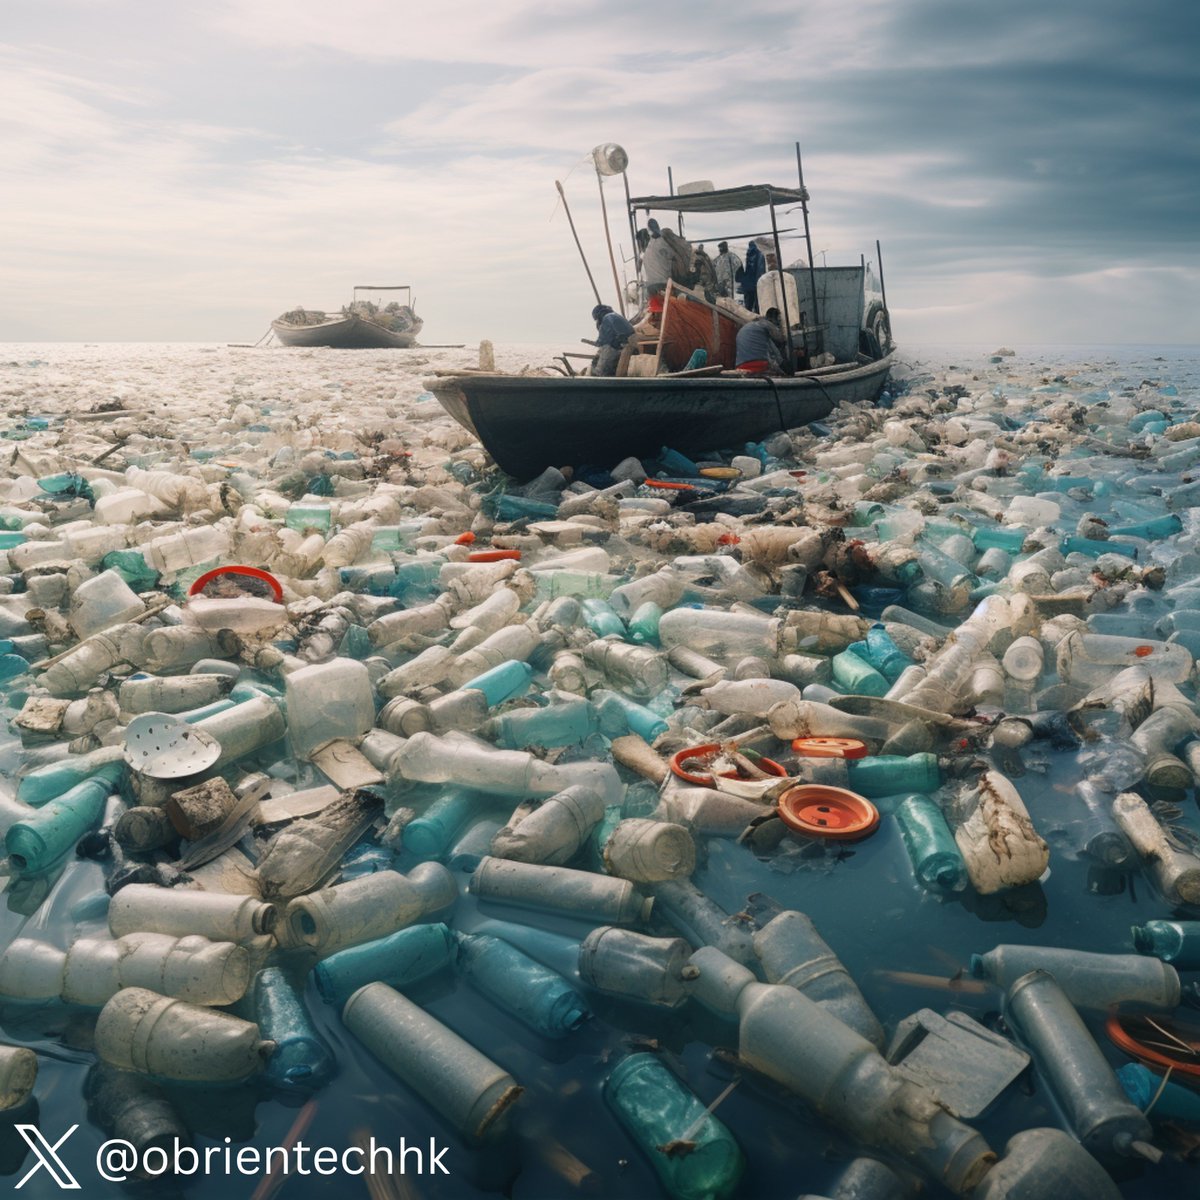 Trash belongs in bins, not in our oceans and forests. Let's be responsible stewards of the Earth and reduce plastic pollution. 🌎🗑️
#PlasticPollution #PlasticFree #PlasticFreeWorld #CleanSeas #BeatPlasticPollution #Sustainability